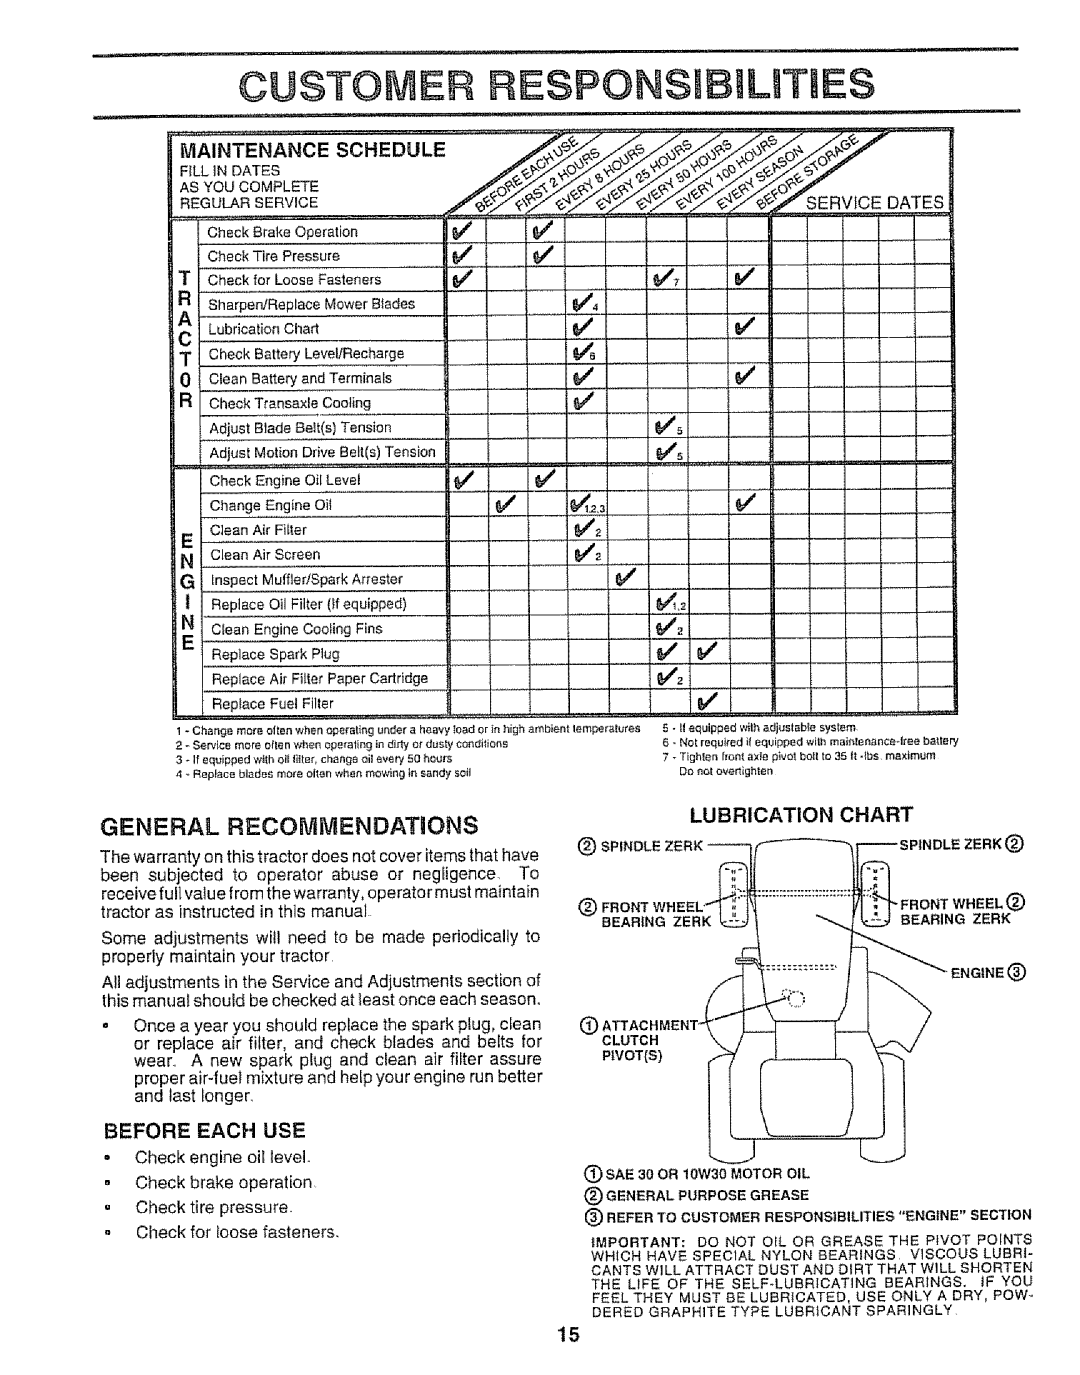 Craftsman 917.252560 General Recommendations, €leanAi;Filter, Schedule, Before Each Use, Lubrication, Chart, Maintenance 